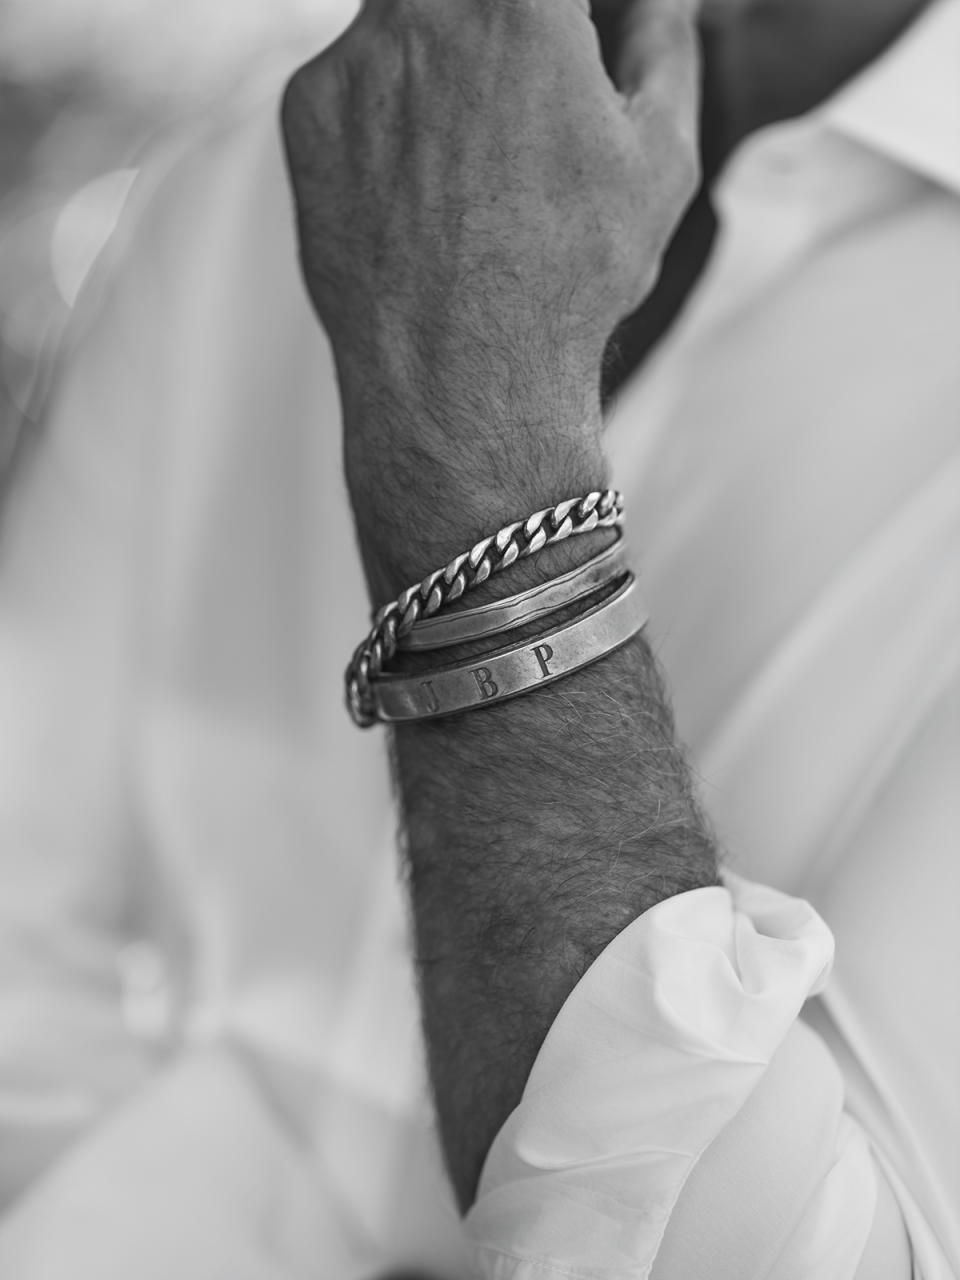 Pearson wears three silver bracelets, one for each of his three children